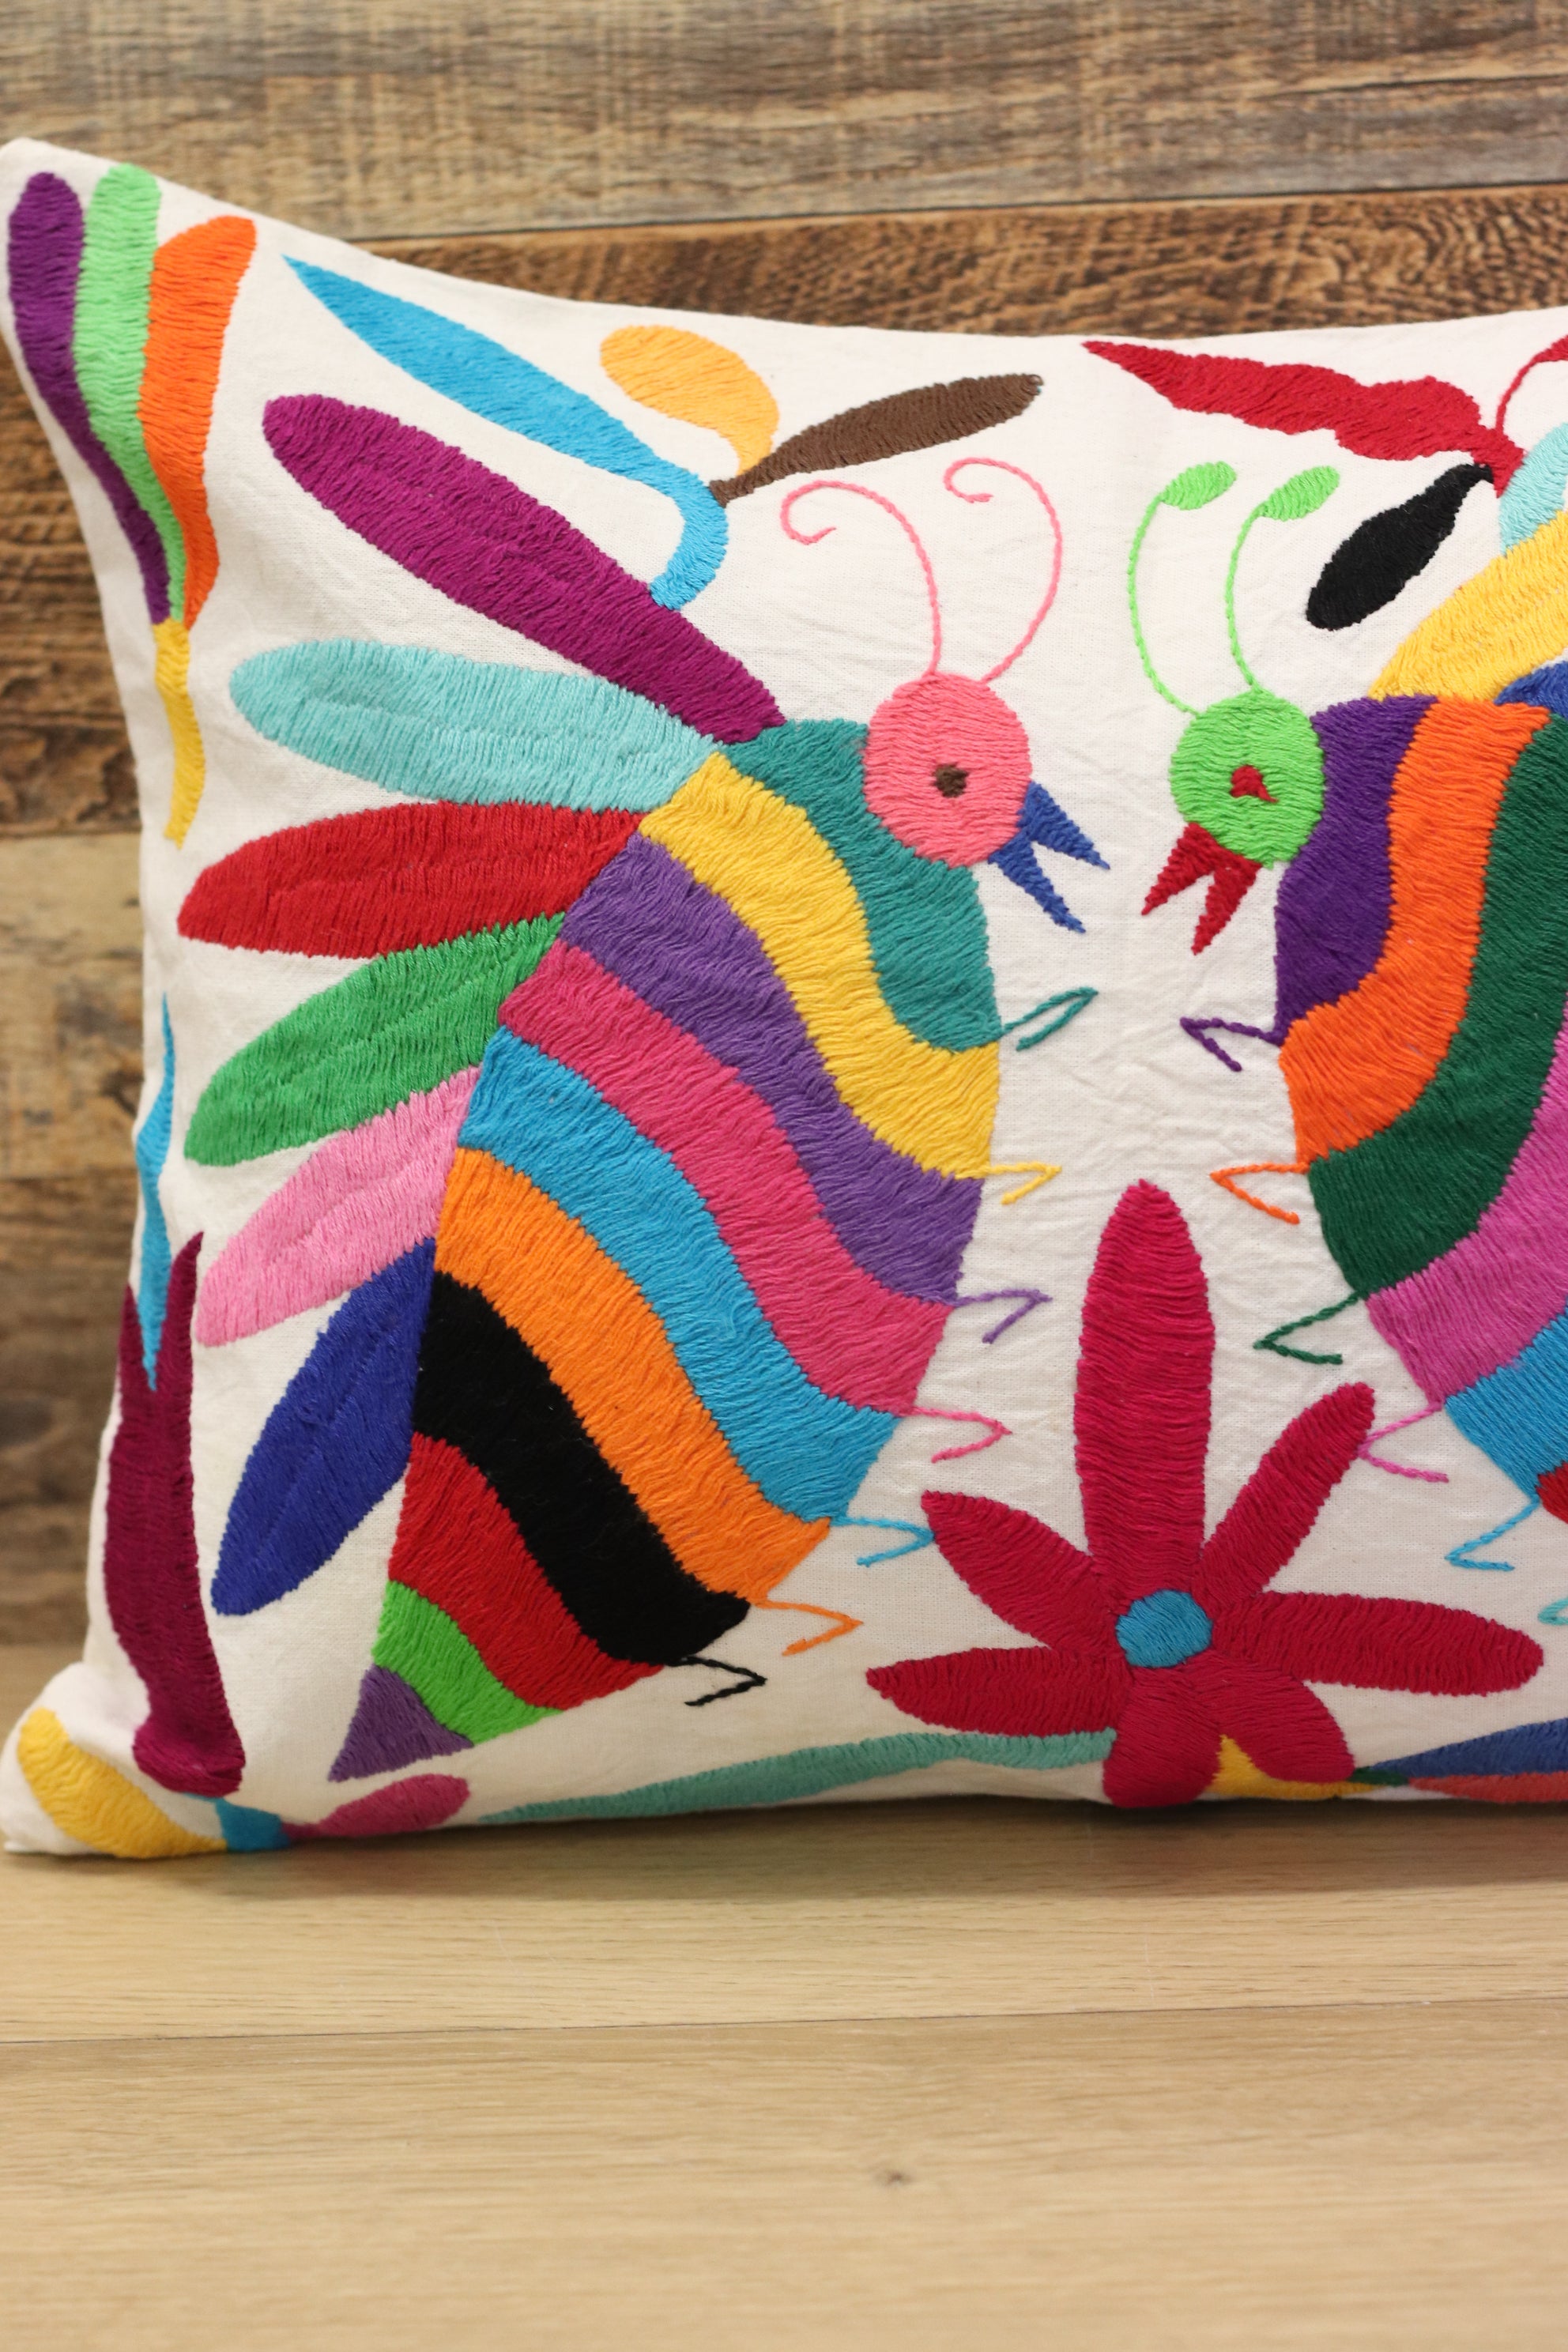 Otomi Tenango Pillow Cover Hand Embroidered with Cute Bugs and Flowers in Vibrant Colors. Handmade in Mexico. Ships from the USA. Buy now at www.felipeandgrace.com. 